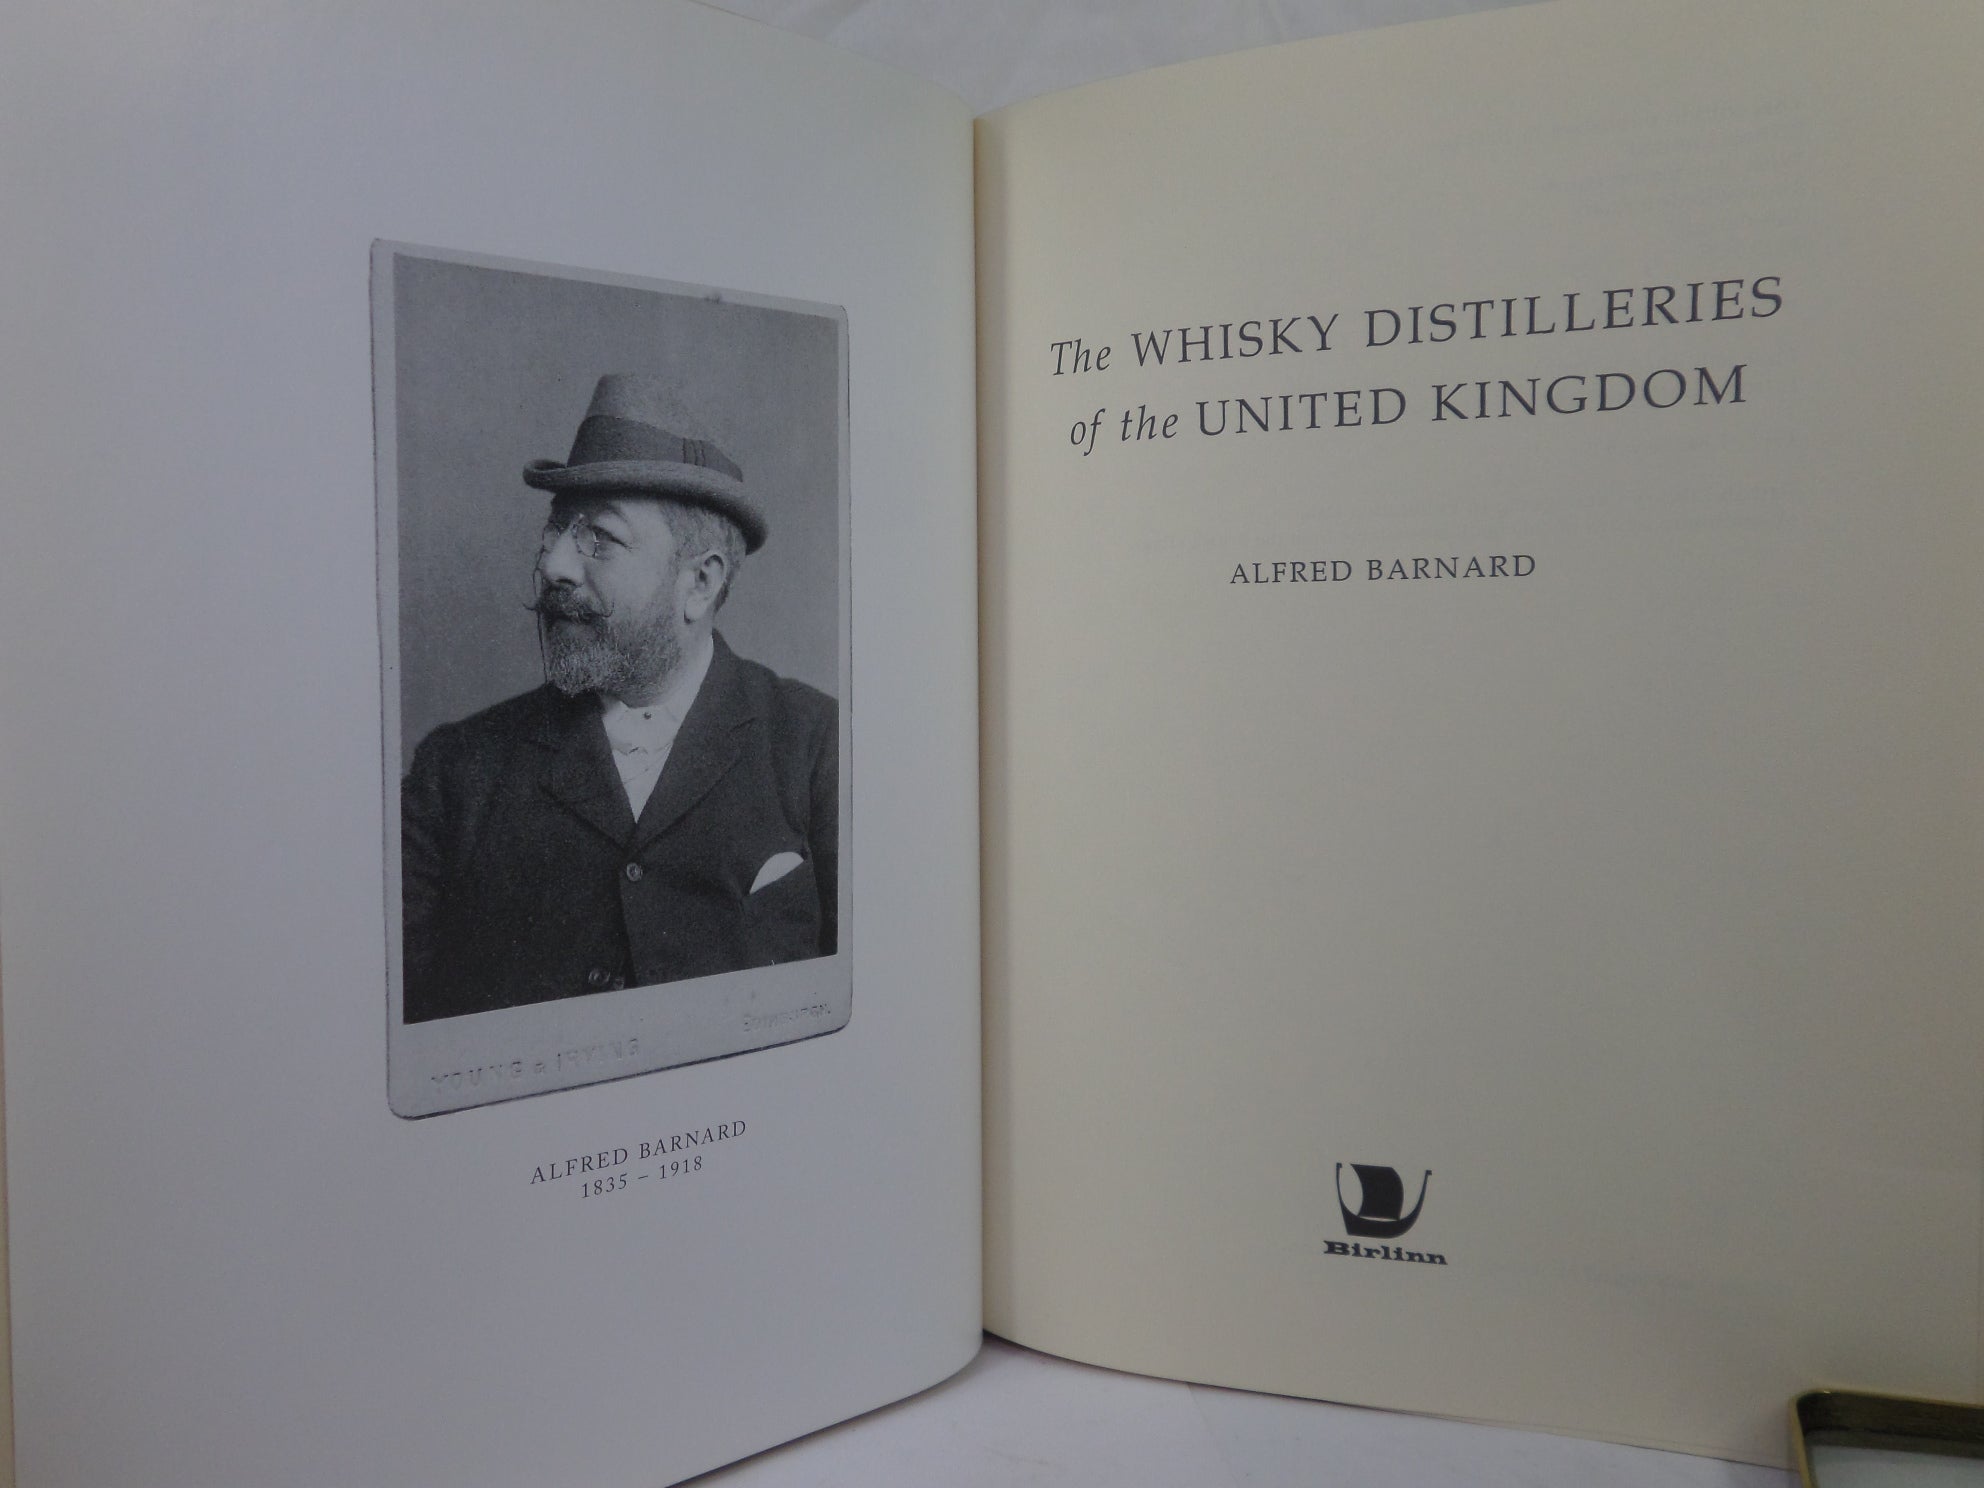 THE WHISKY DISTILLERIES OF THE UNITED KINGDOM BY ALFRED BARNARD 2003 HARDCOVER